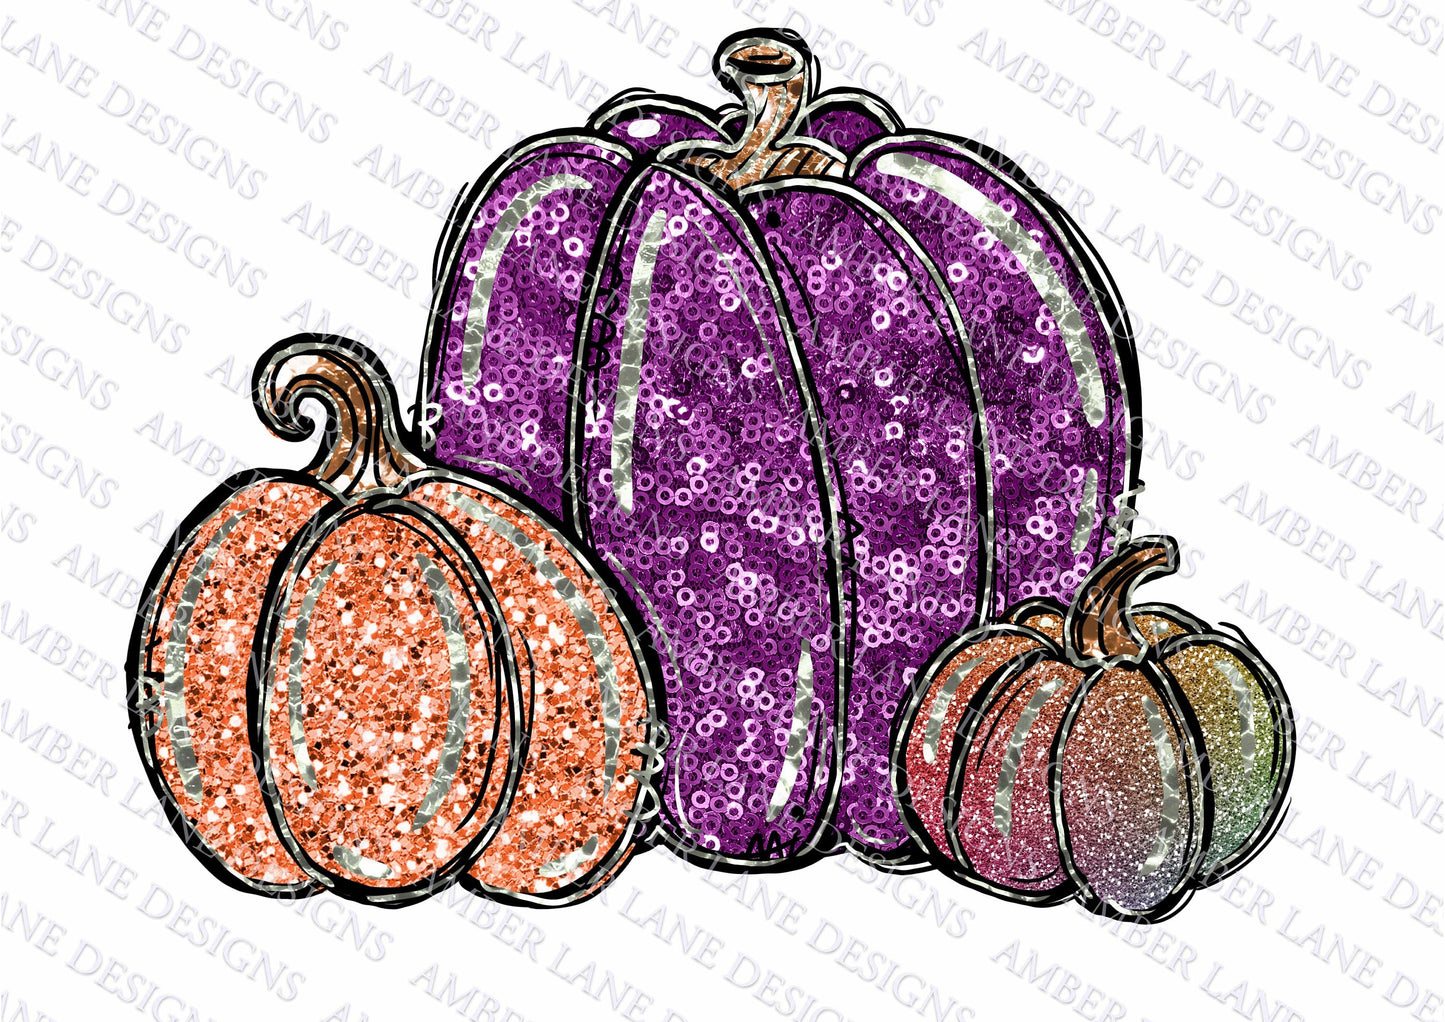 Sequin Glitter Bling Rainbow thanksgiving pumpkins, png file -INSTANT DOWNLOAD